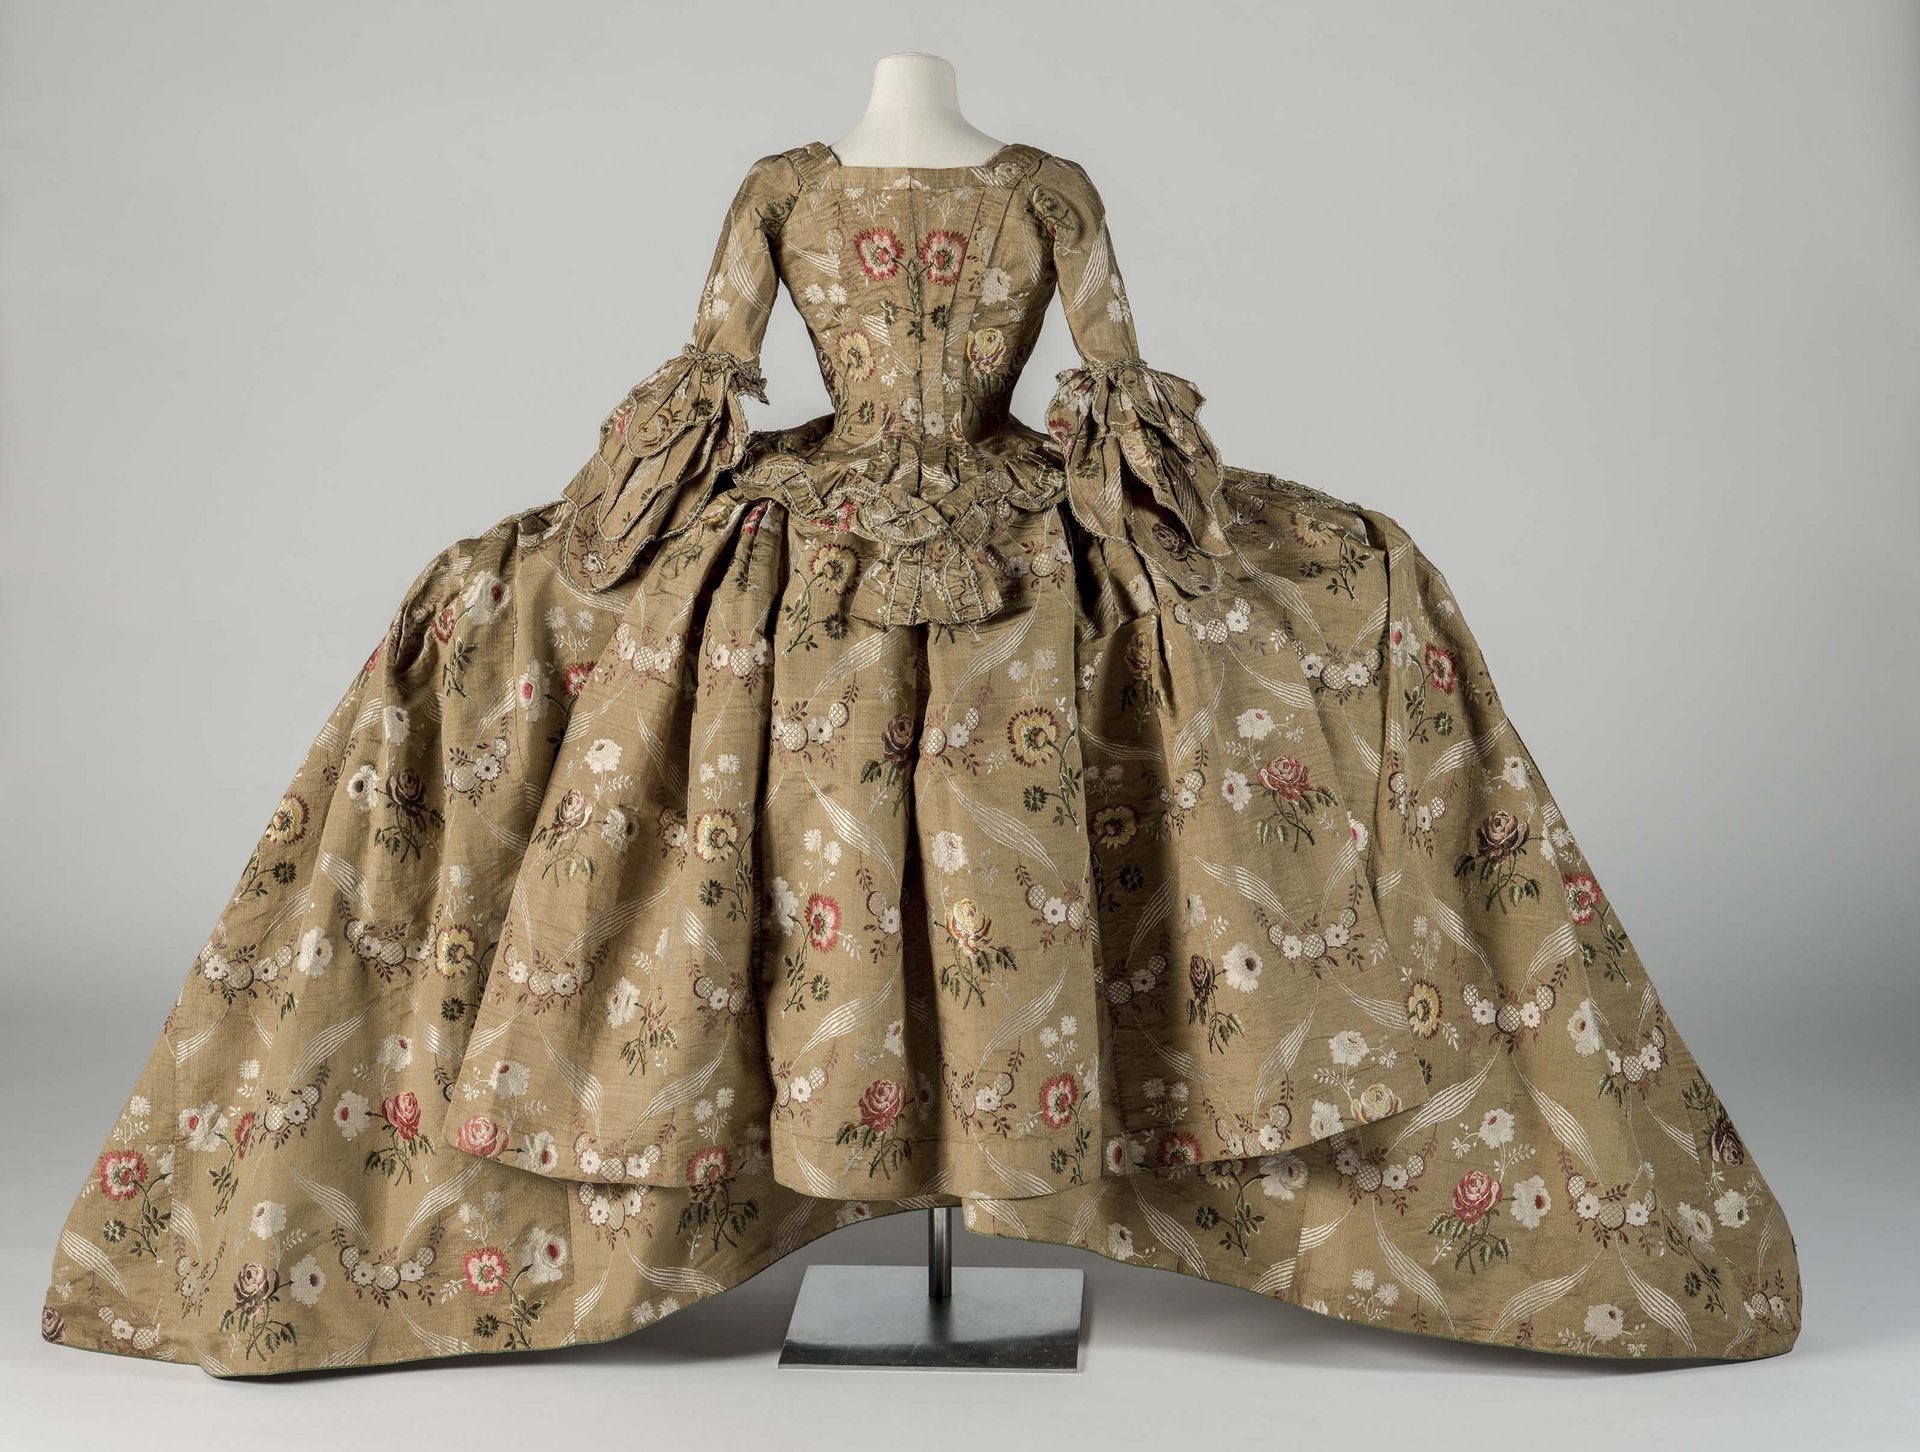 An 18th-century mantua from the Barbican's The Vulgar: Fashion Redefined exhbition